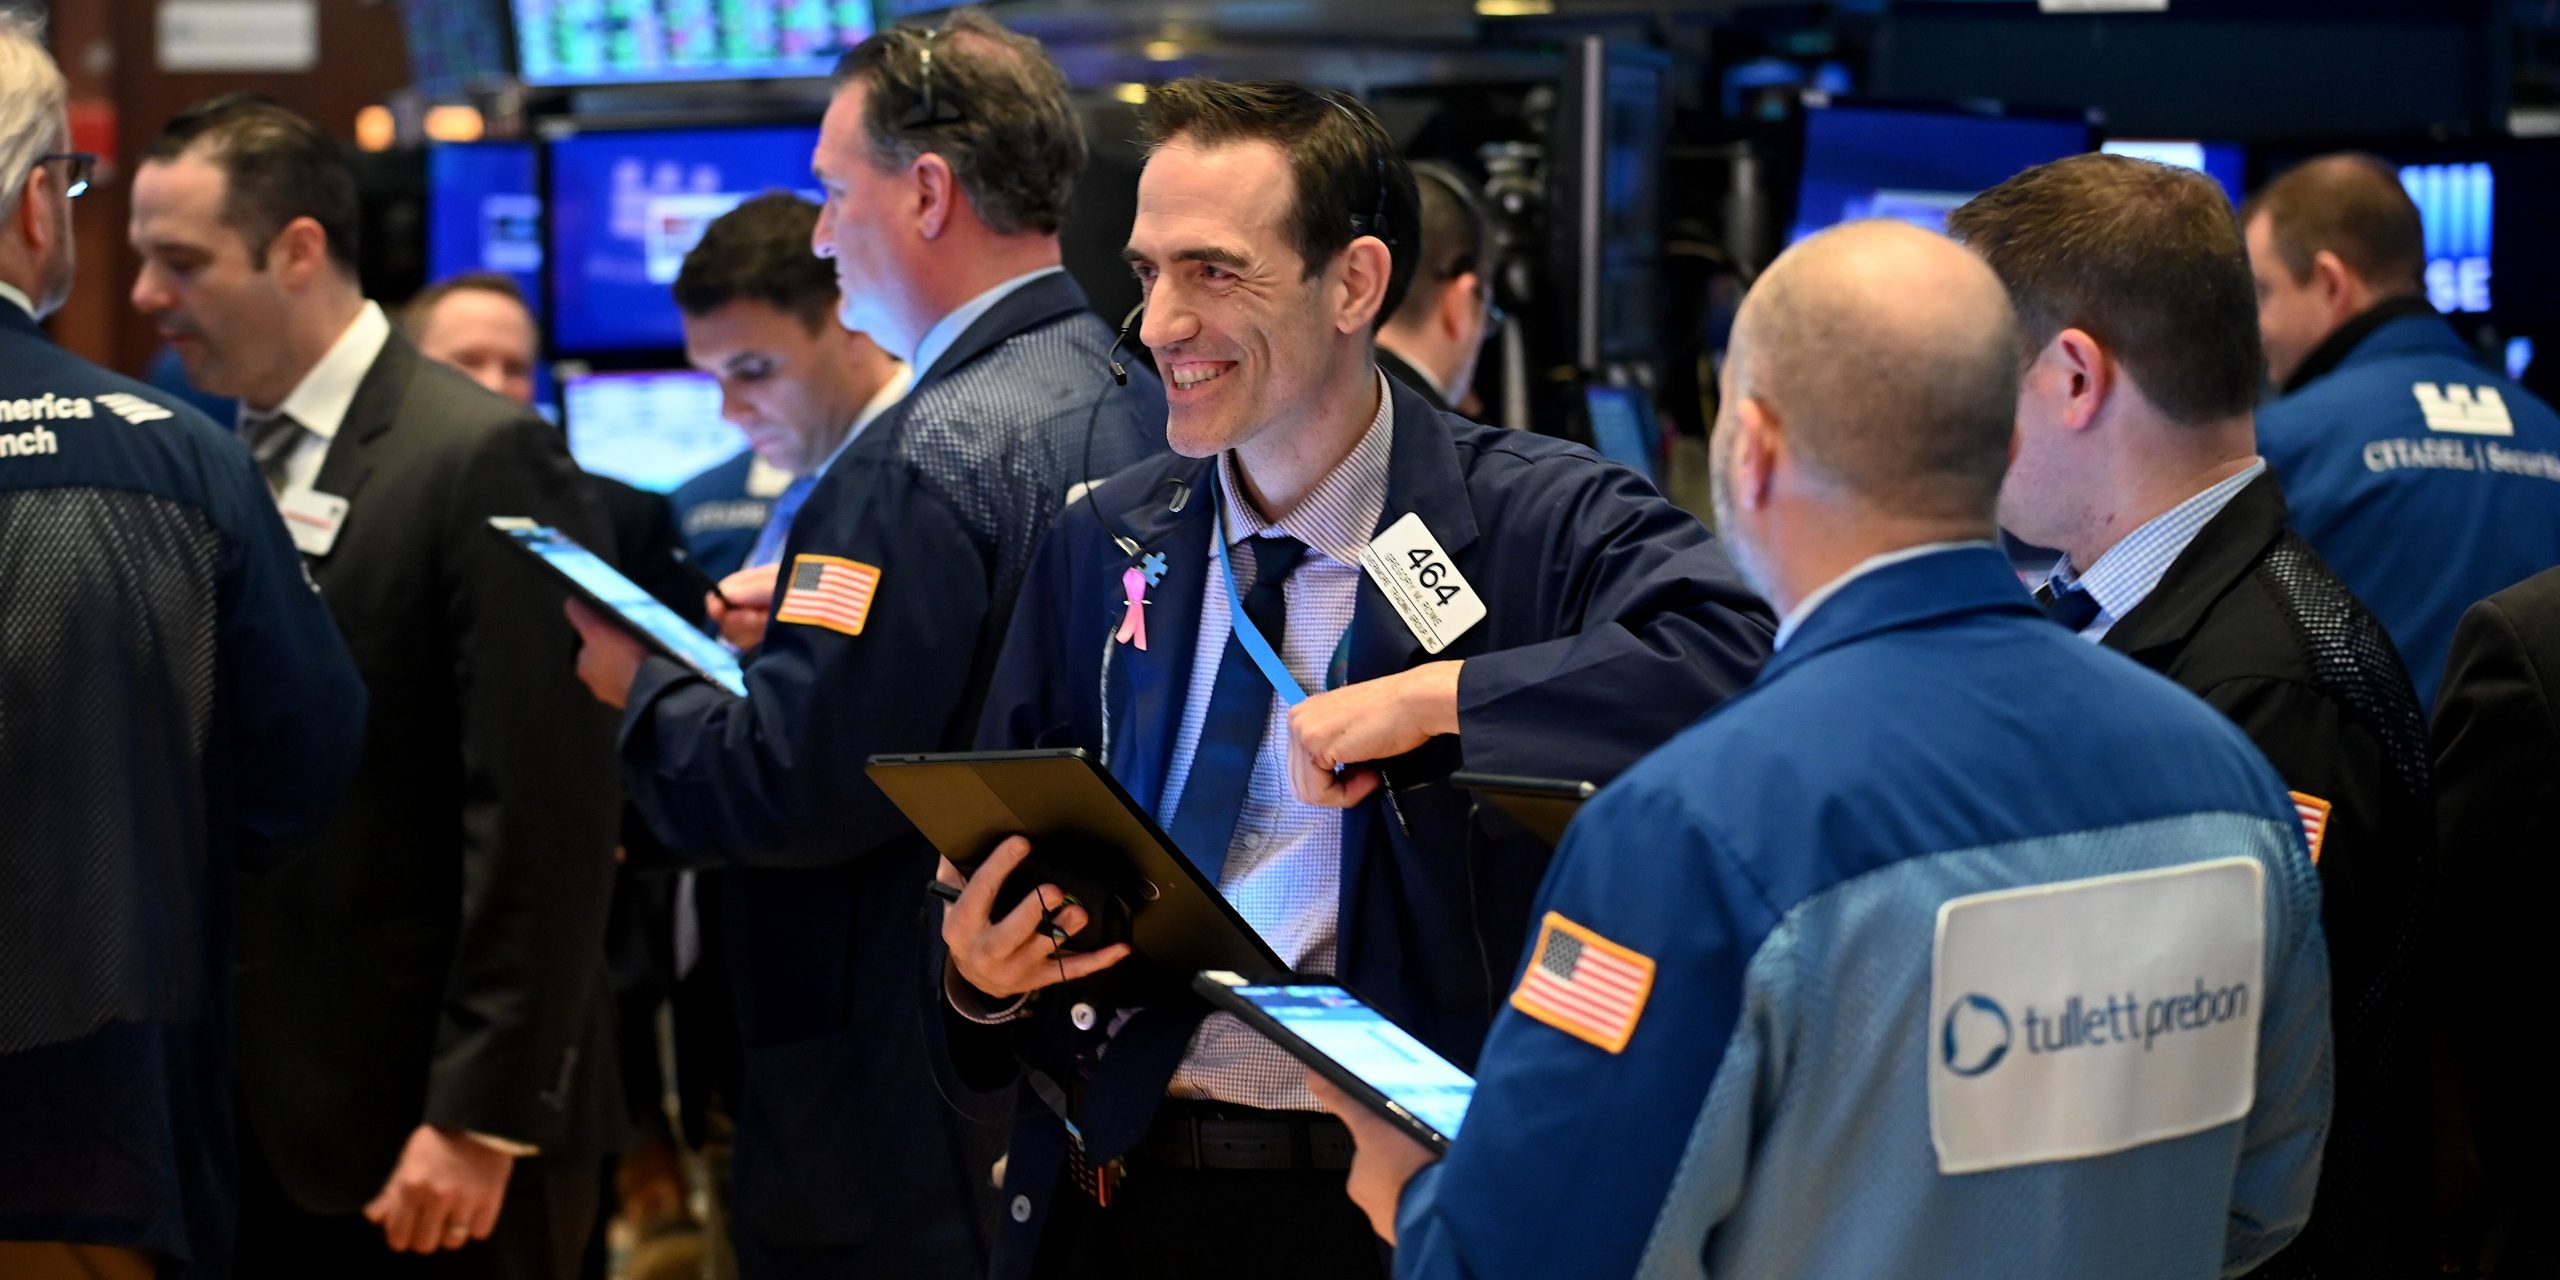 GettyImages 1207533986 Traders work during the closing bell at the New York Stock Exchange (NYSE) on March 17, 2020 at Wall Street in New York City. - Wall Street stocks rallied Tuesday on expectations for massive federal stimulus to address the economic hit from the coronavirus, partially recovering some of their losses from the prior session. (Photo by Johannes EISELE / AFP) (Photo by JOHANNES EISELE/AFP via Getty Images)